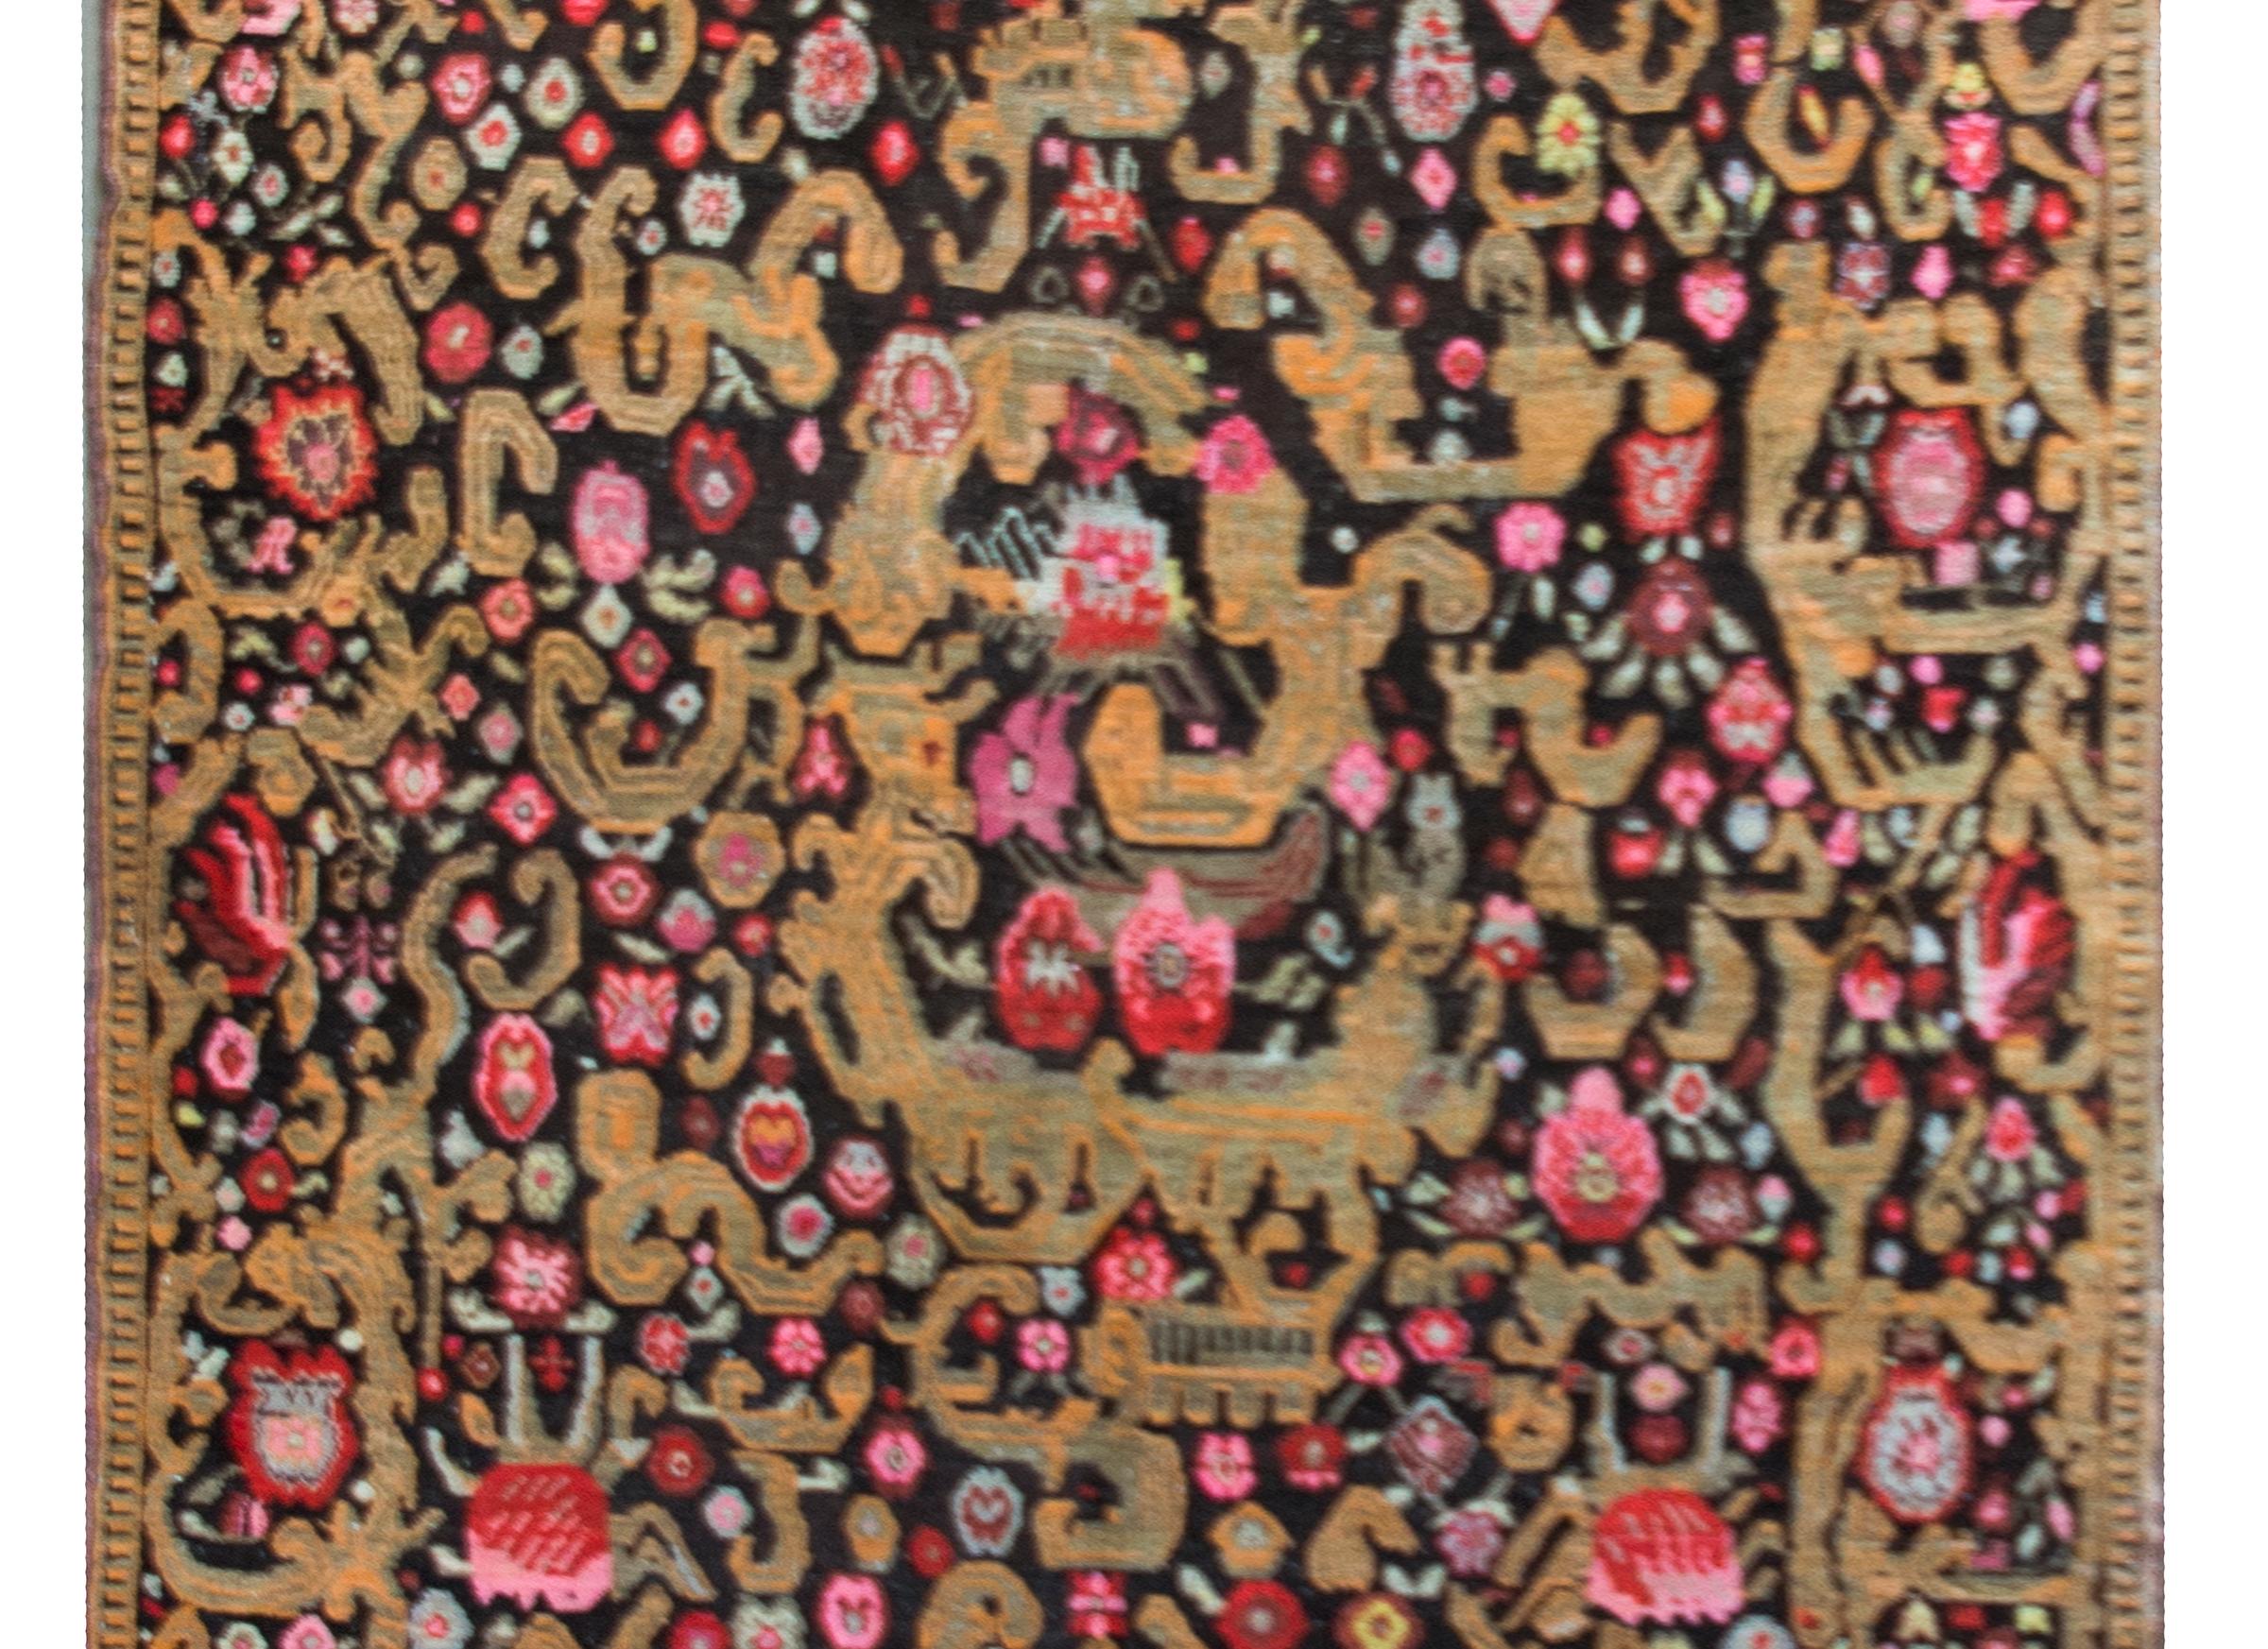 The most incredible and rare early 20th century Persian Kareback rug with a lively pattern of myriad stylized flowers, leaves, and scrolling vines, all woven in crimson, pink, white, gold, and green, and set against a black background.  We've not